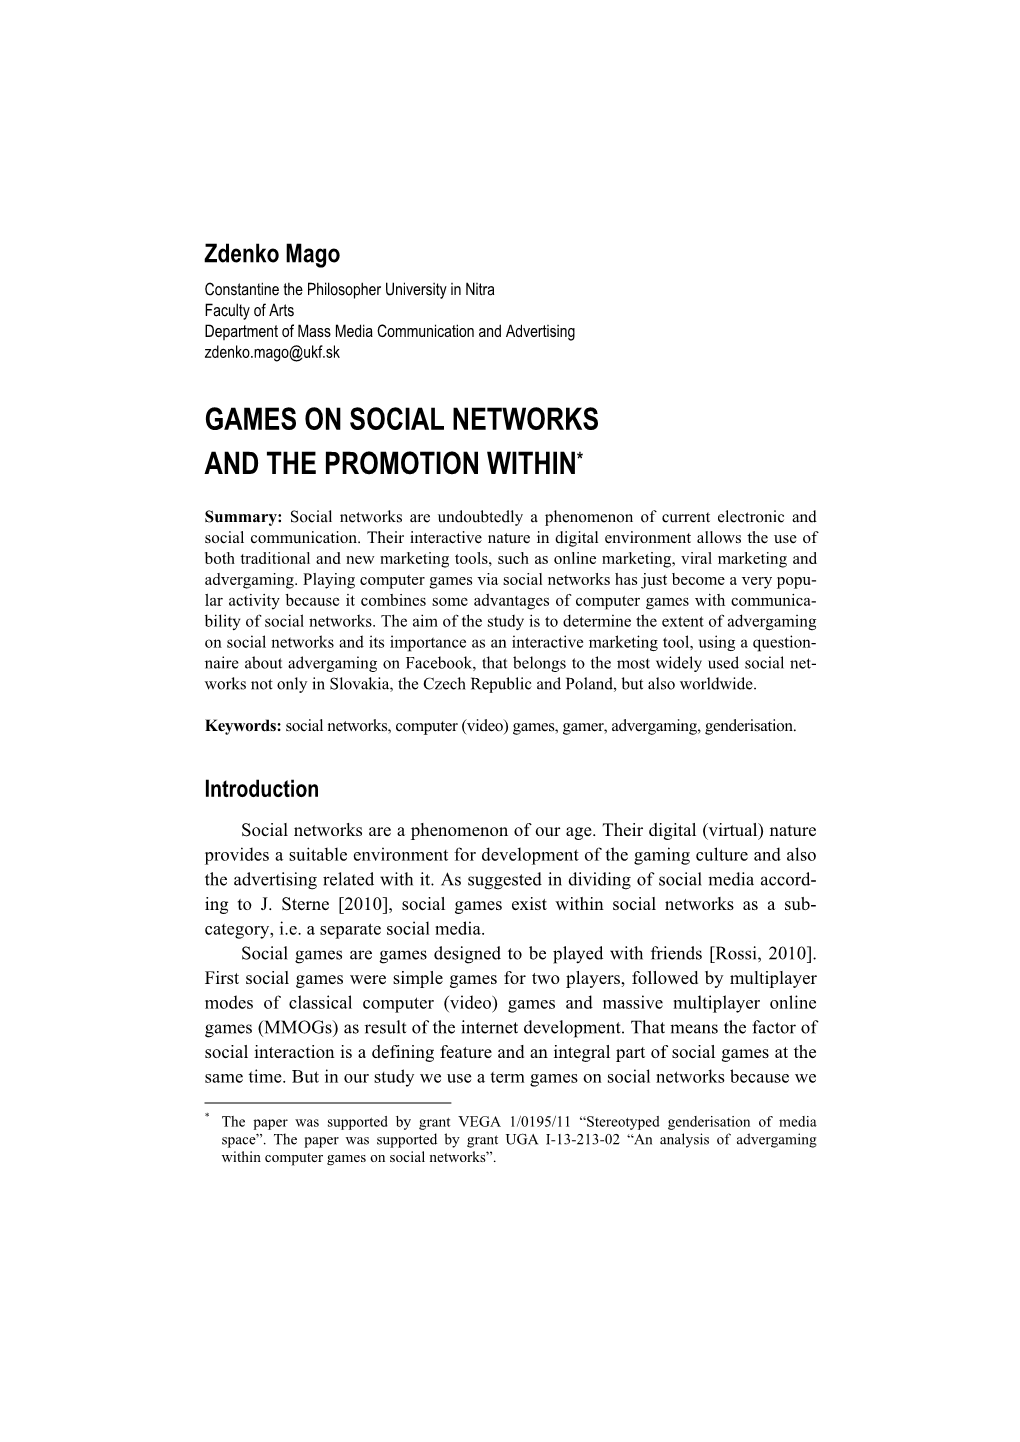 Games on Social Networks and the Promotion Within*